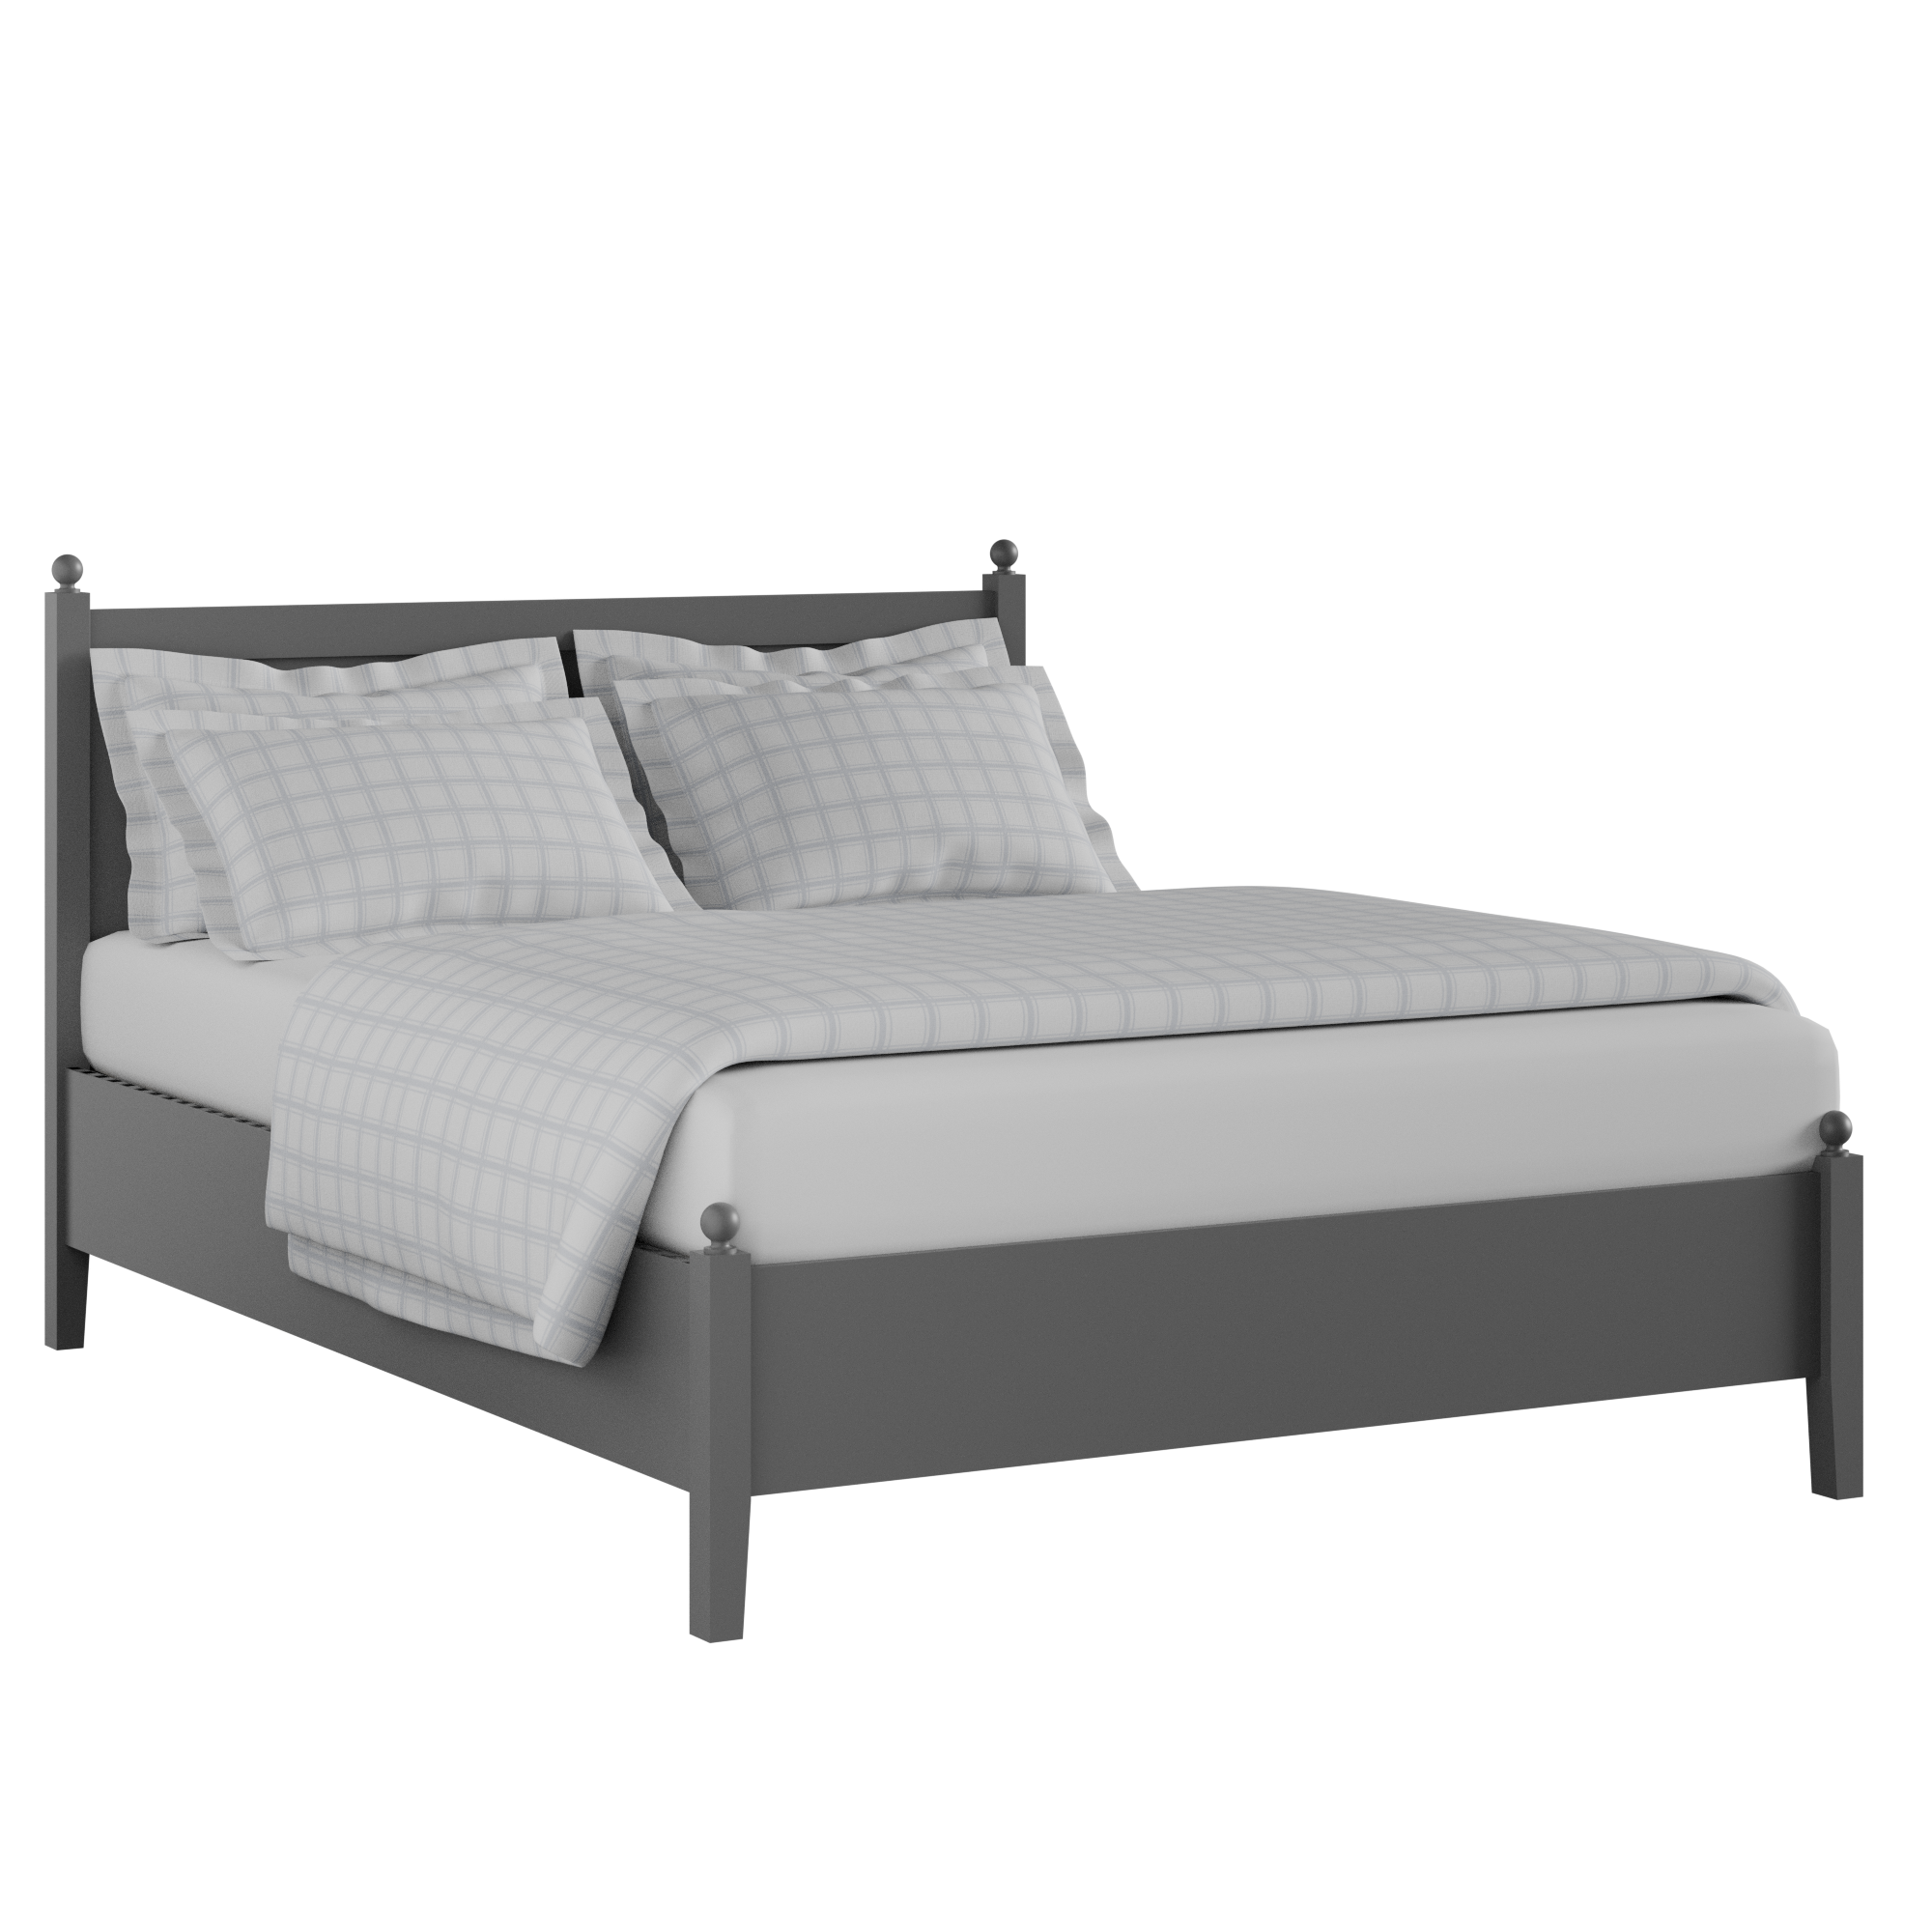 Marbella Low Footend Painted painted wood bed in grey with Juno mattress